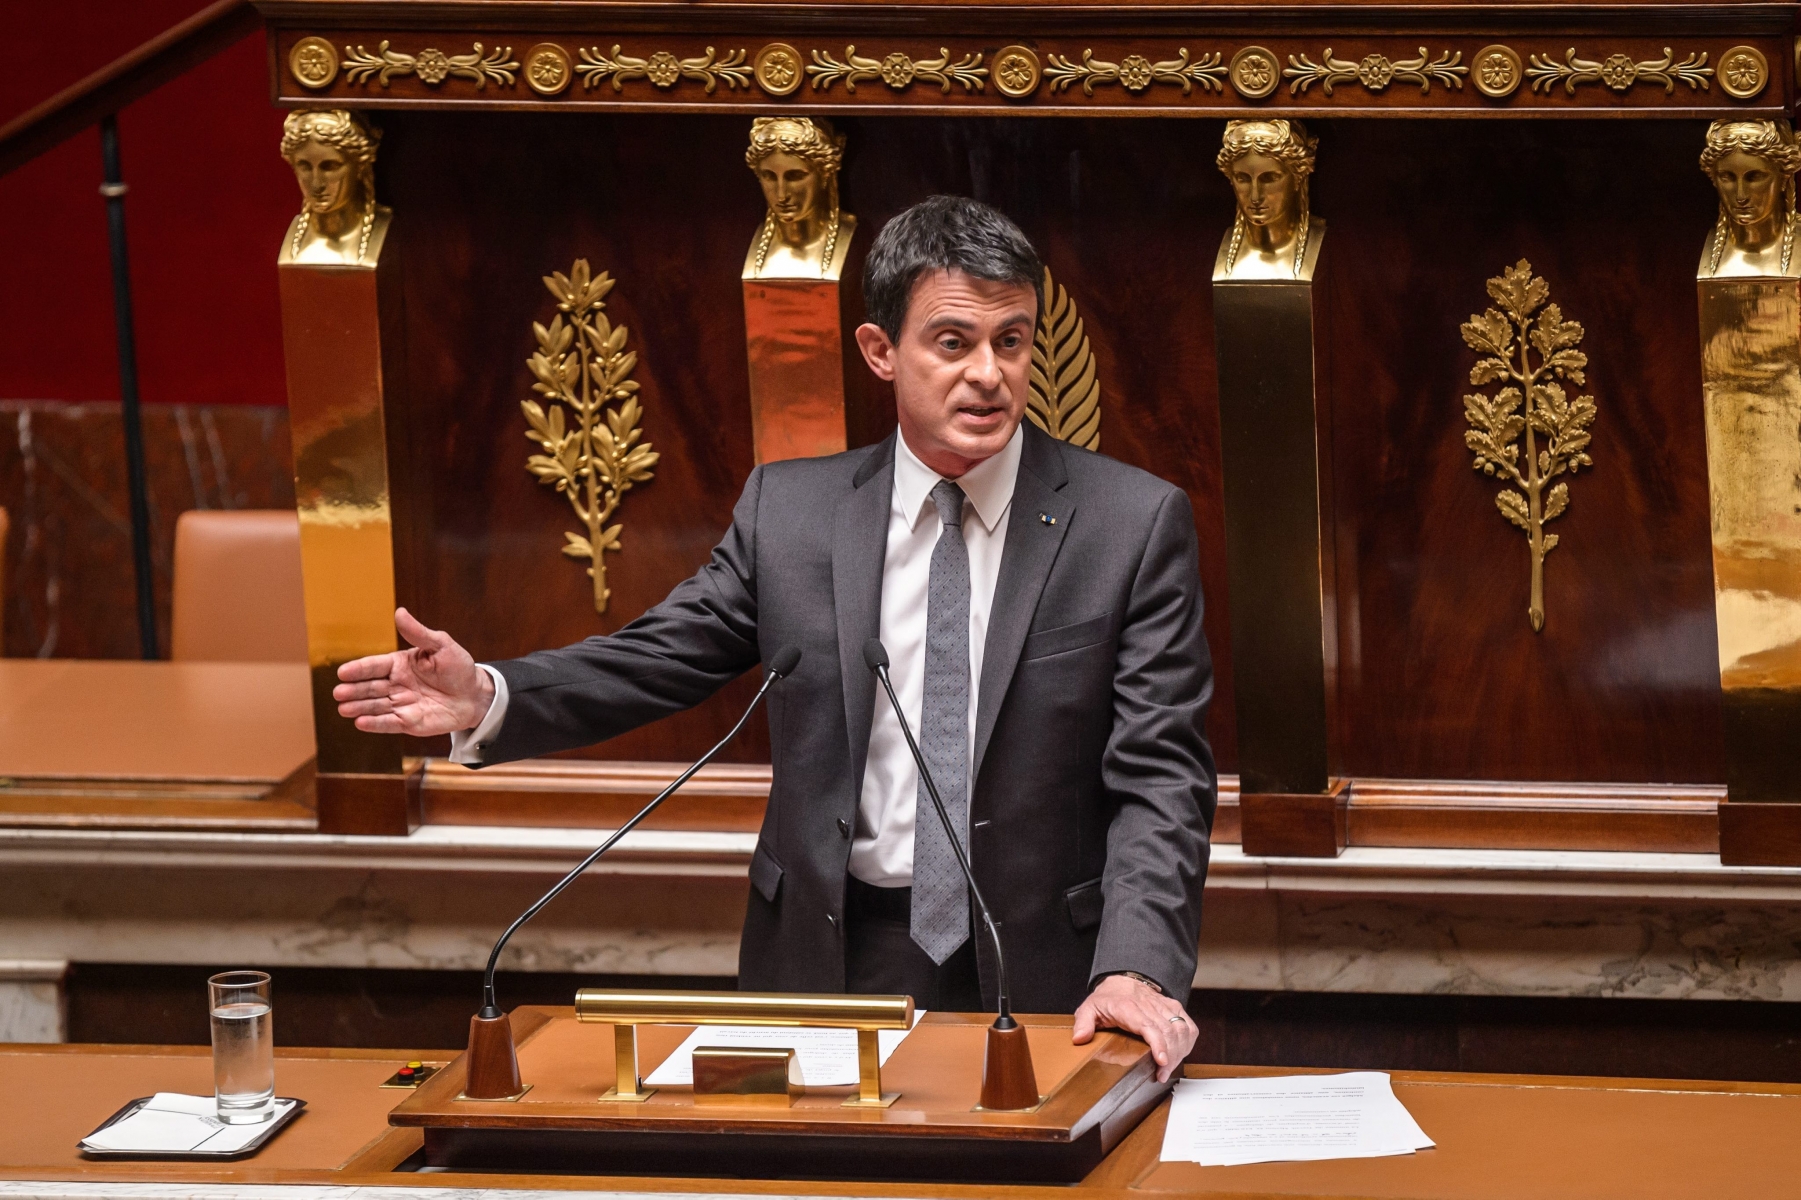 epa05409040 French Prime Minister Manuel Valls delivers a speech during a debate on the disputed planned labour law reforms at the French National Assembly, in Paris on 05 July, 2016. The French cabinet had in May invoked the Constitution's article 49.3, a rarely used article that allows to pass the bill without a parliament vote. The disputed labour law bill has been triggering violent protests and clashes since weeks.  EPA/CHRISTOPHE PETIT TESSON FRANCE PARLIAMENT LABOR LAW